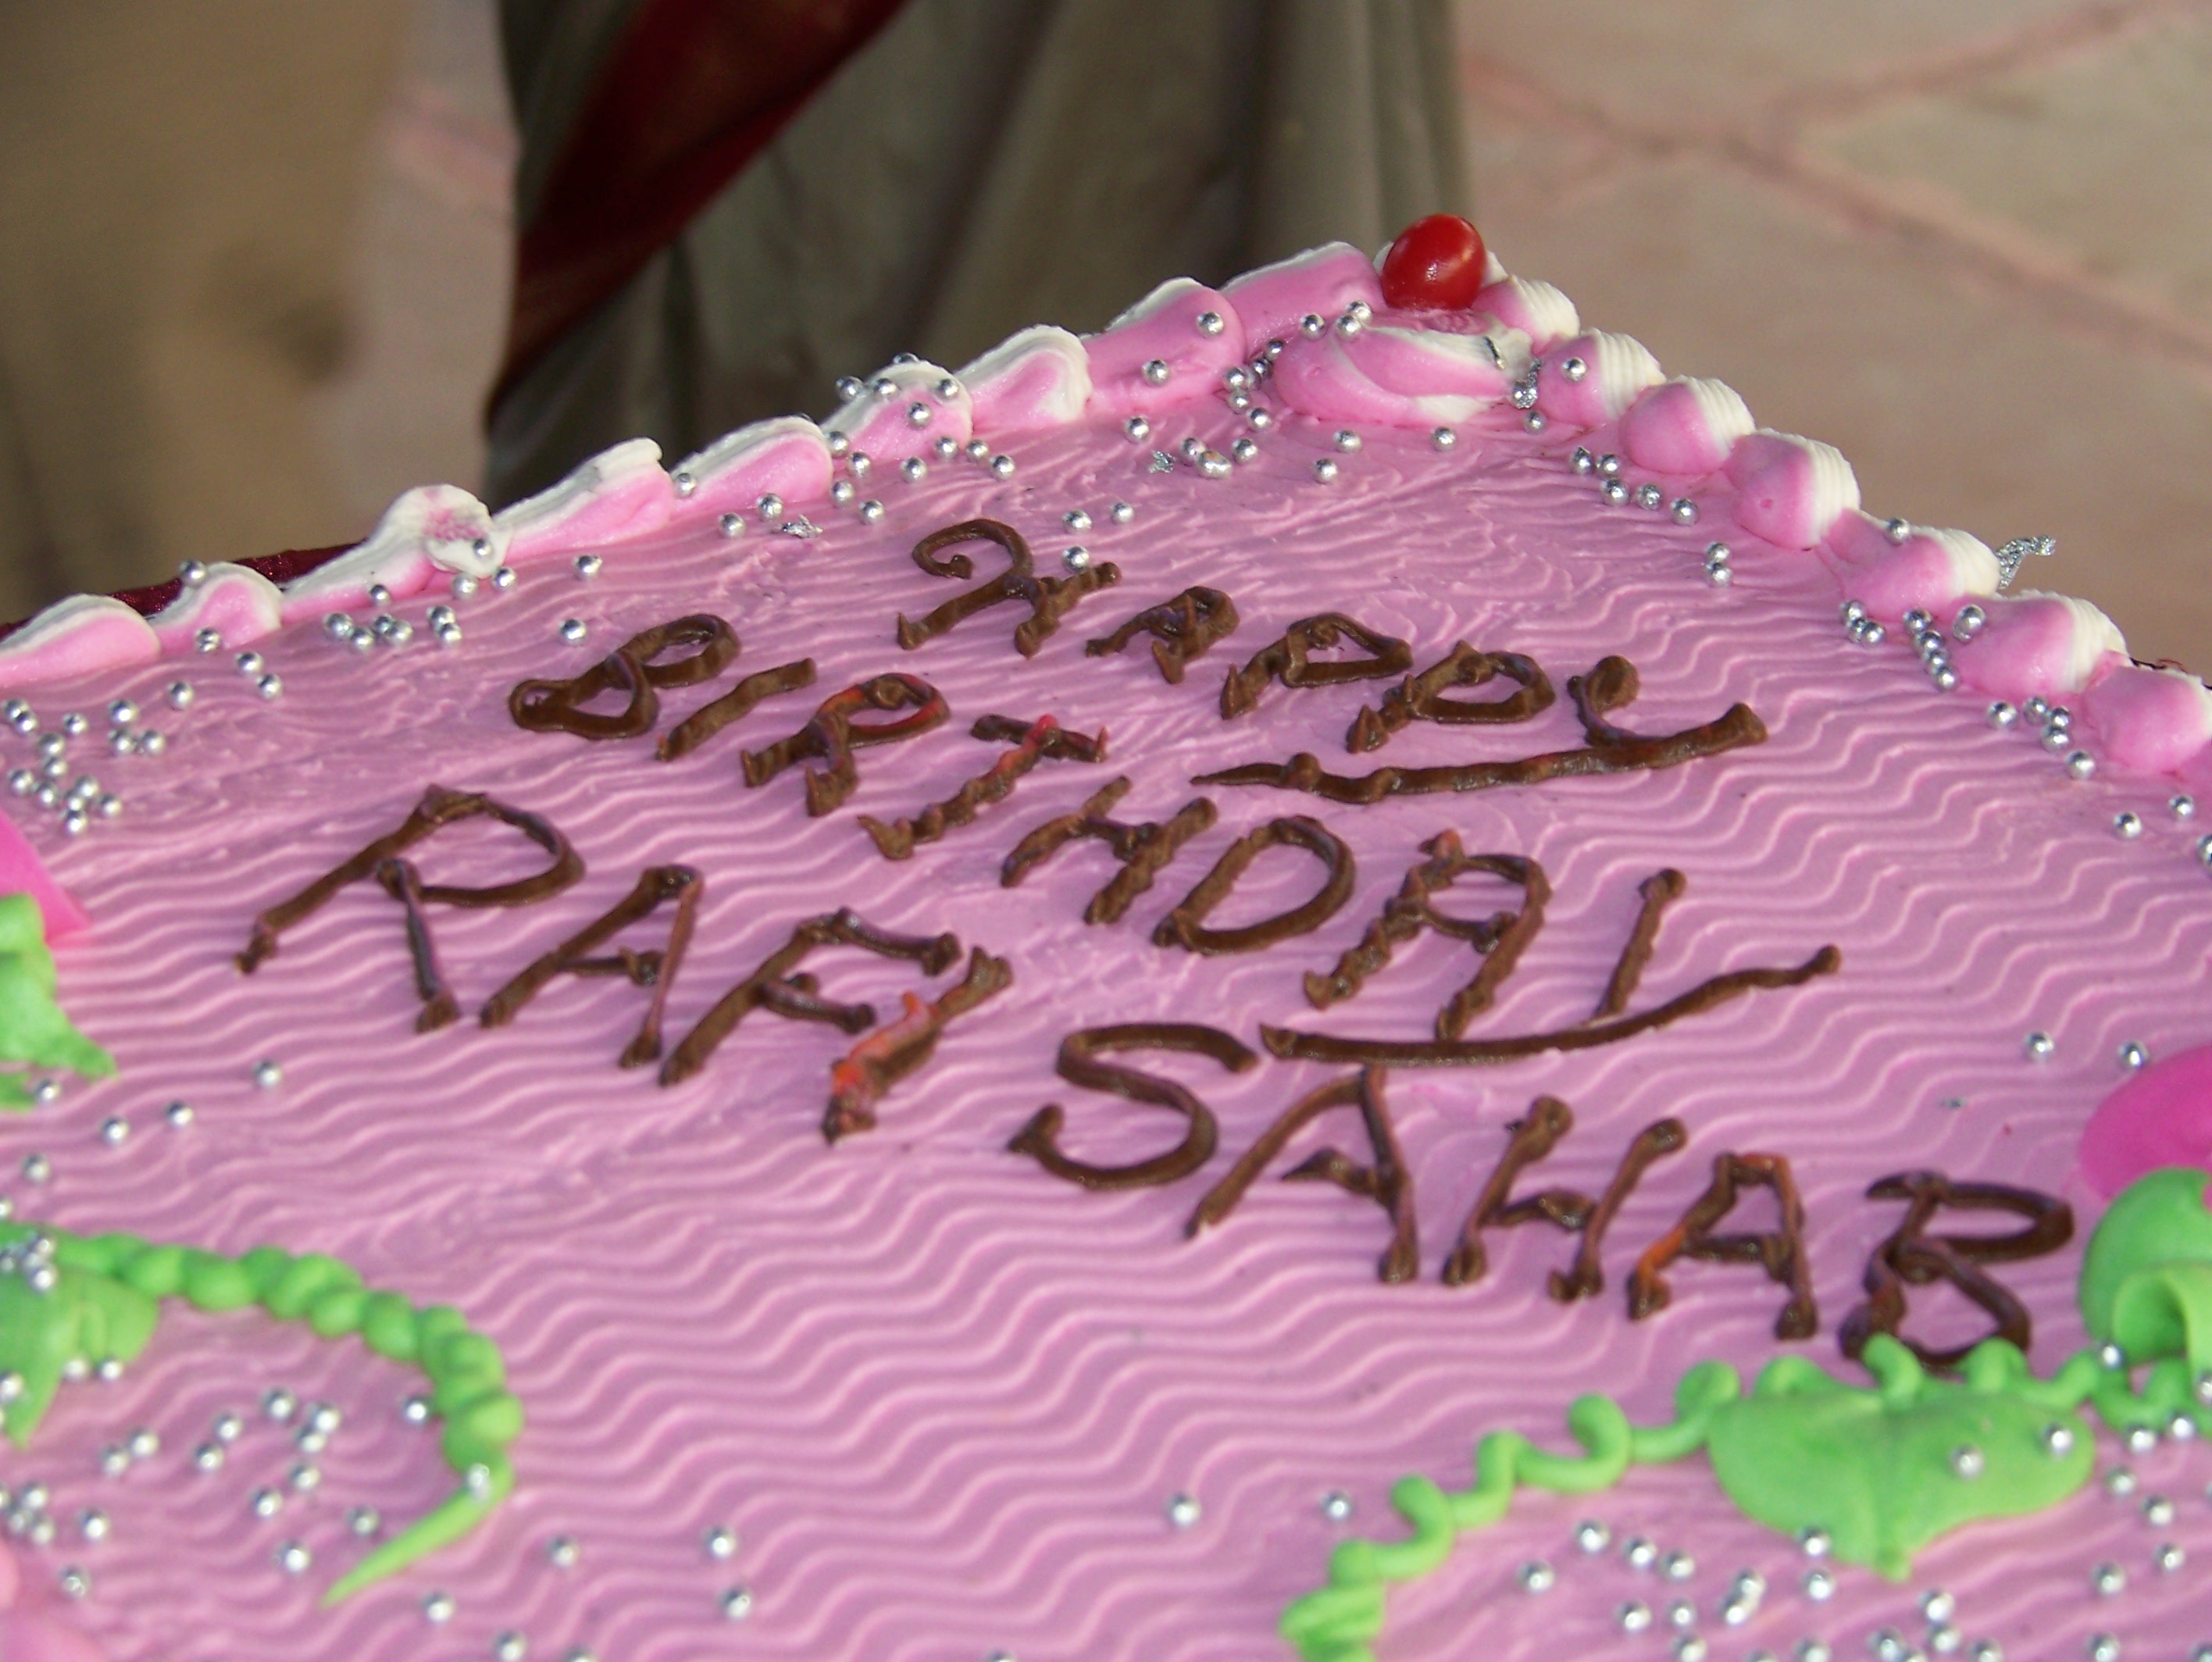 The Birthday Cake at PADHARO SE musical show on 25th December 2008 